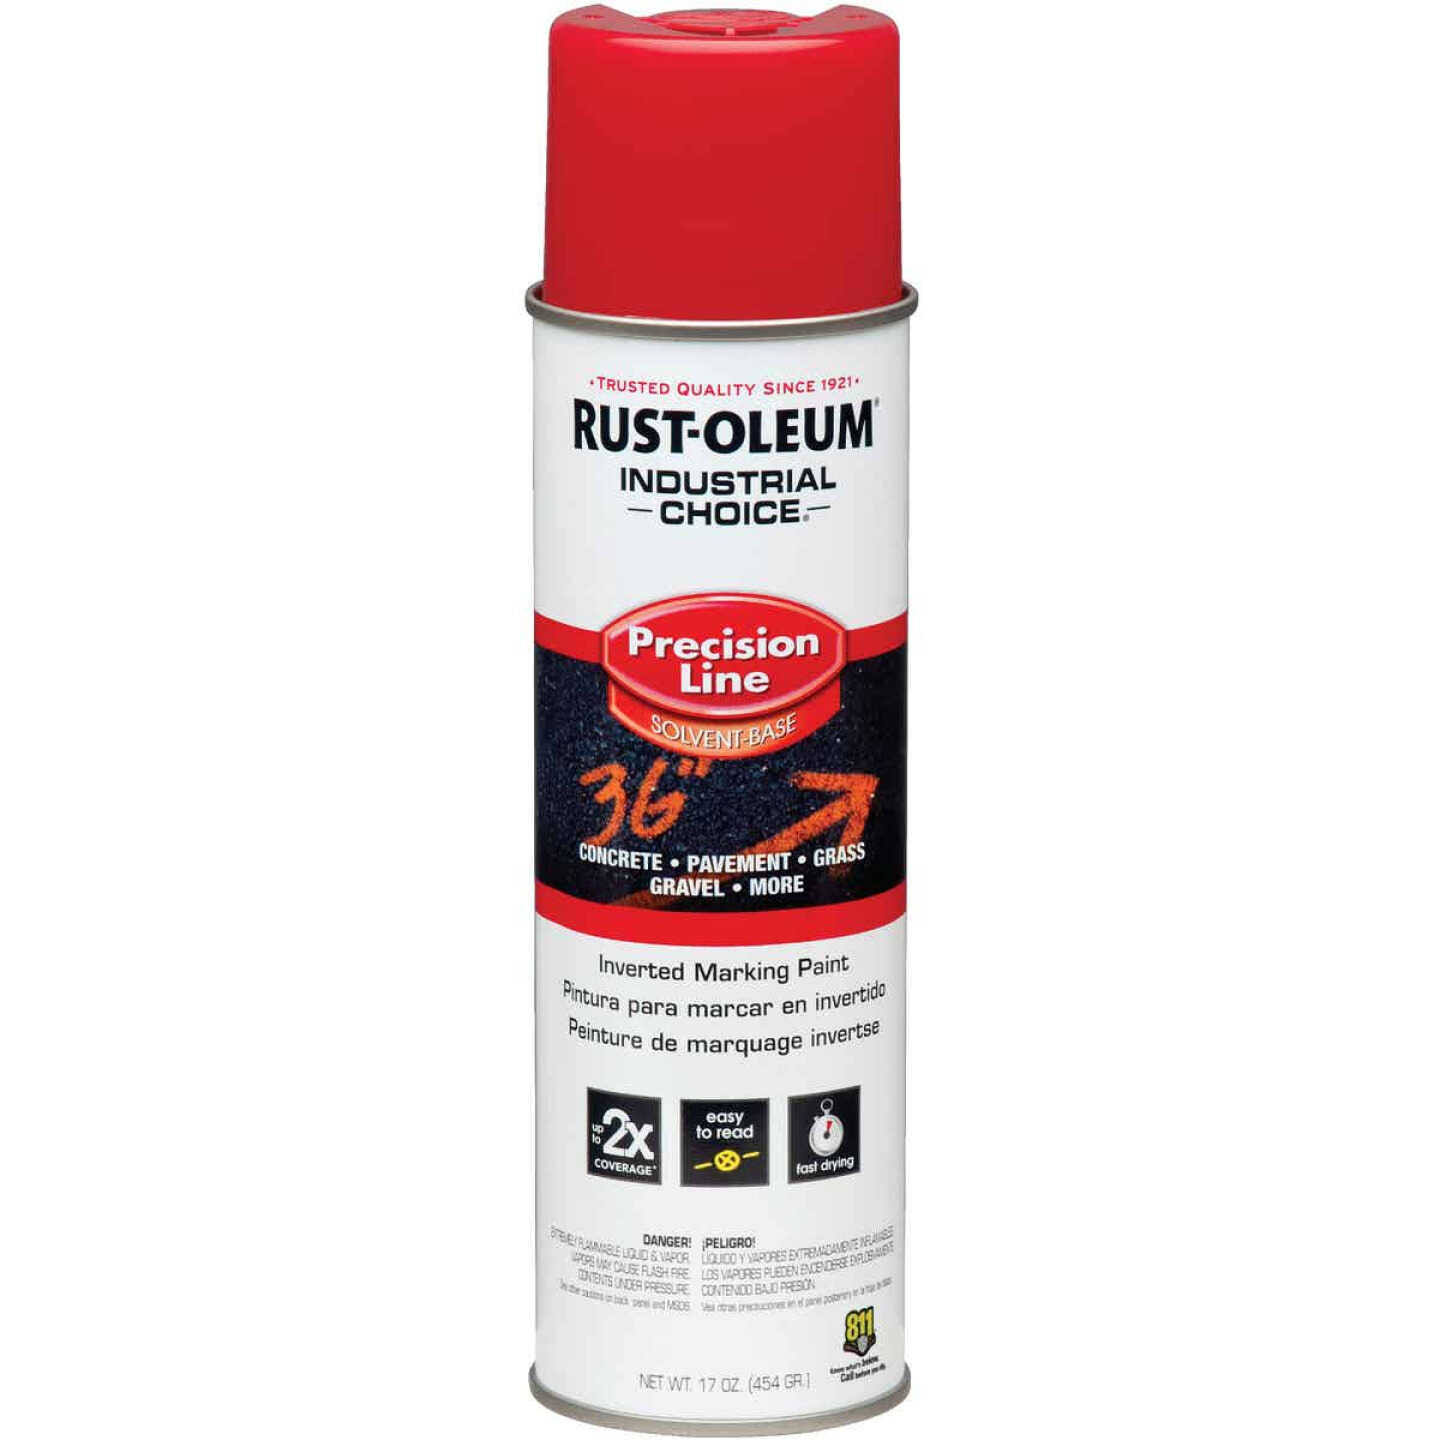 Rust-Oleum 203029V Precision Line Marking Paint,red